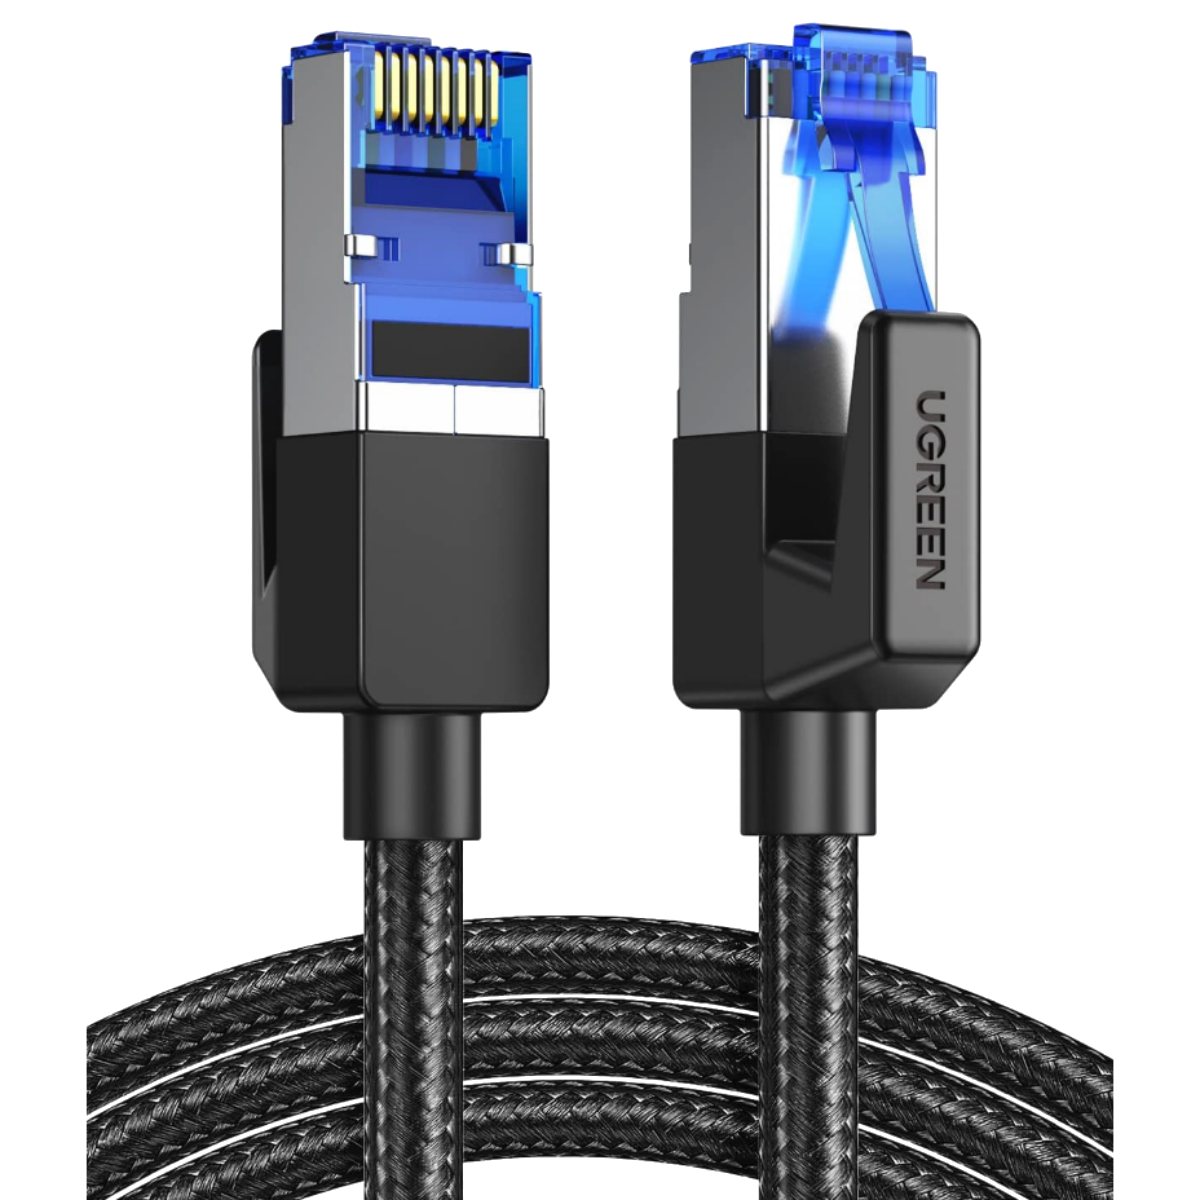 Both connectors of the UGREEN Cat 8 Ethernet Cable